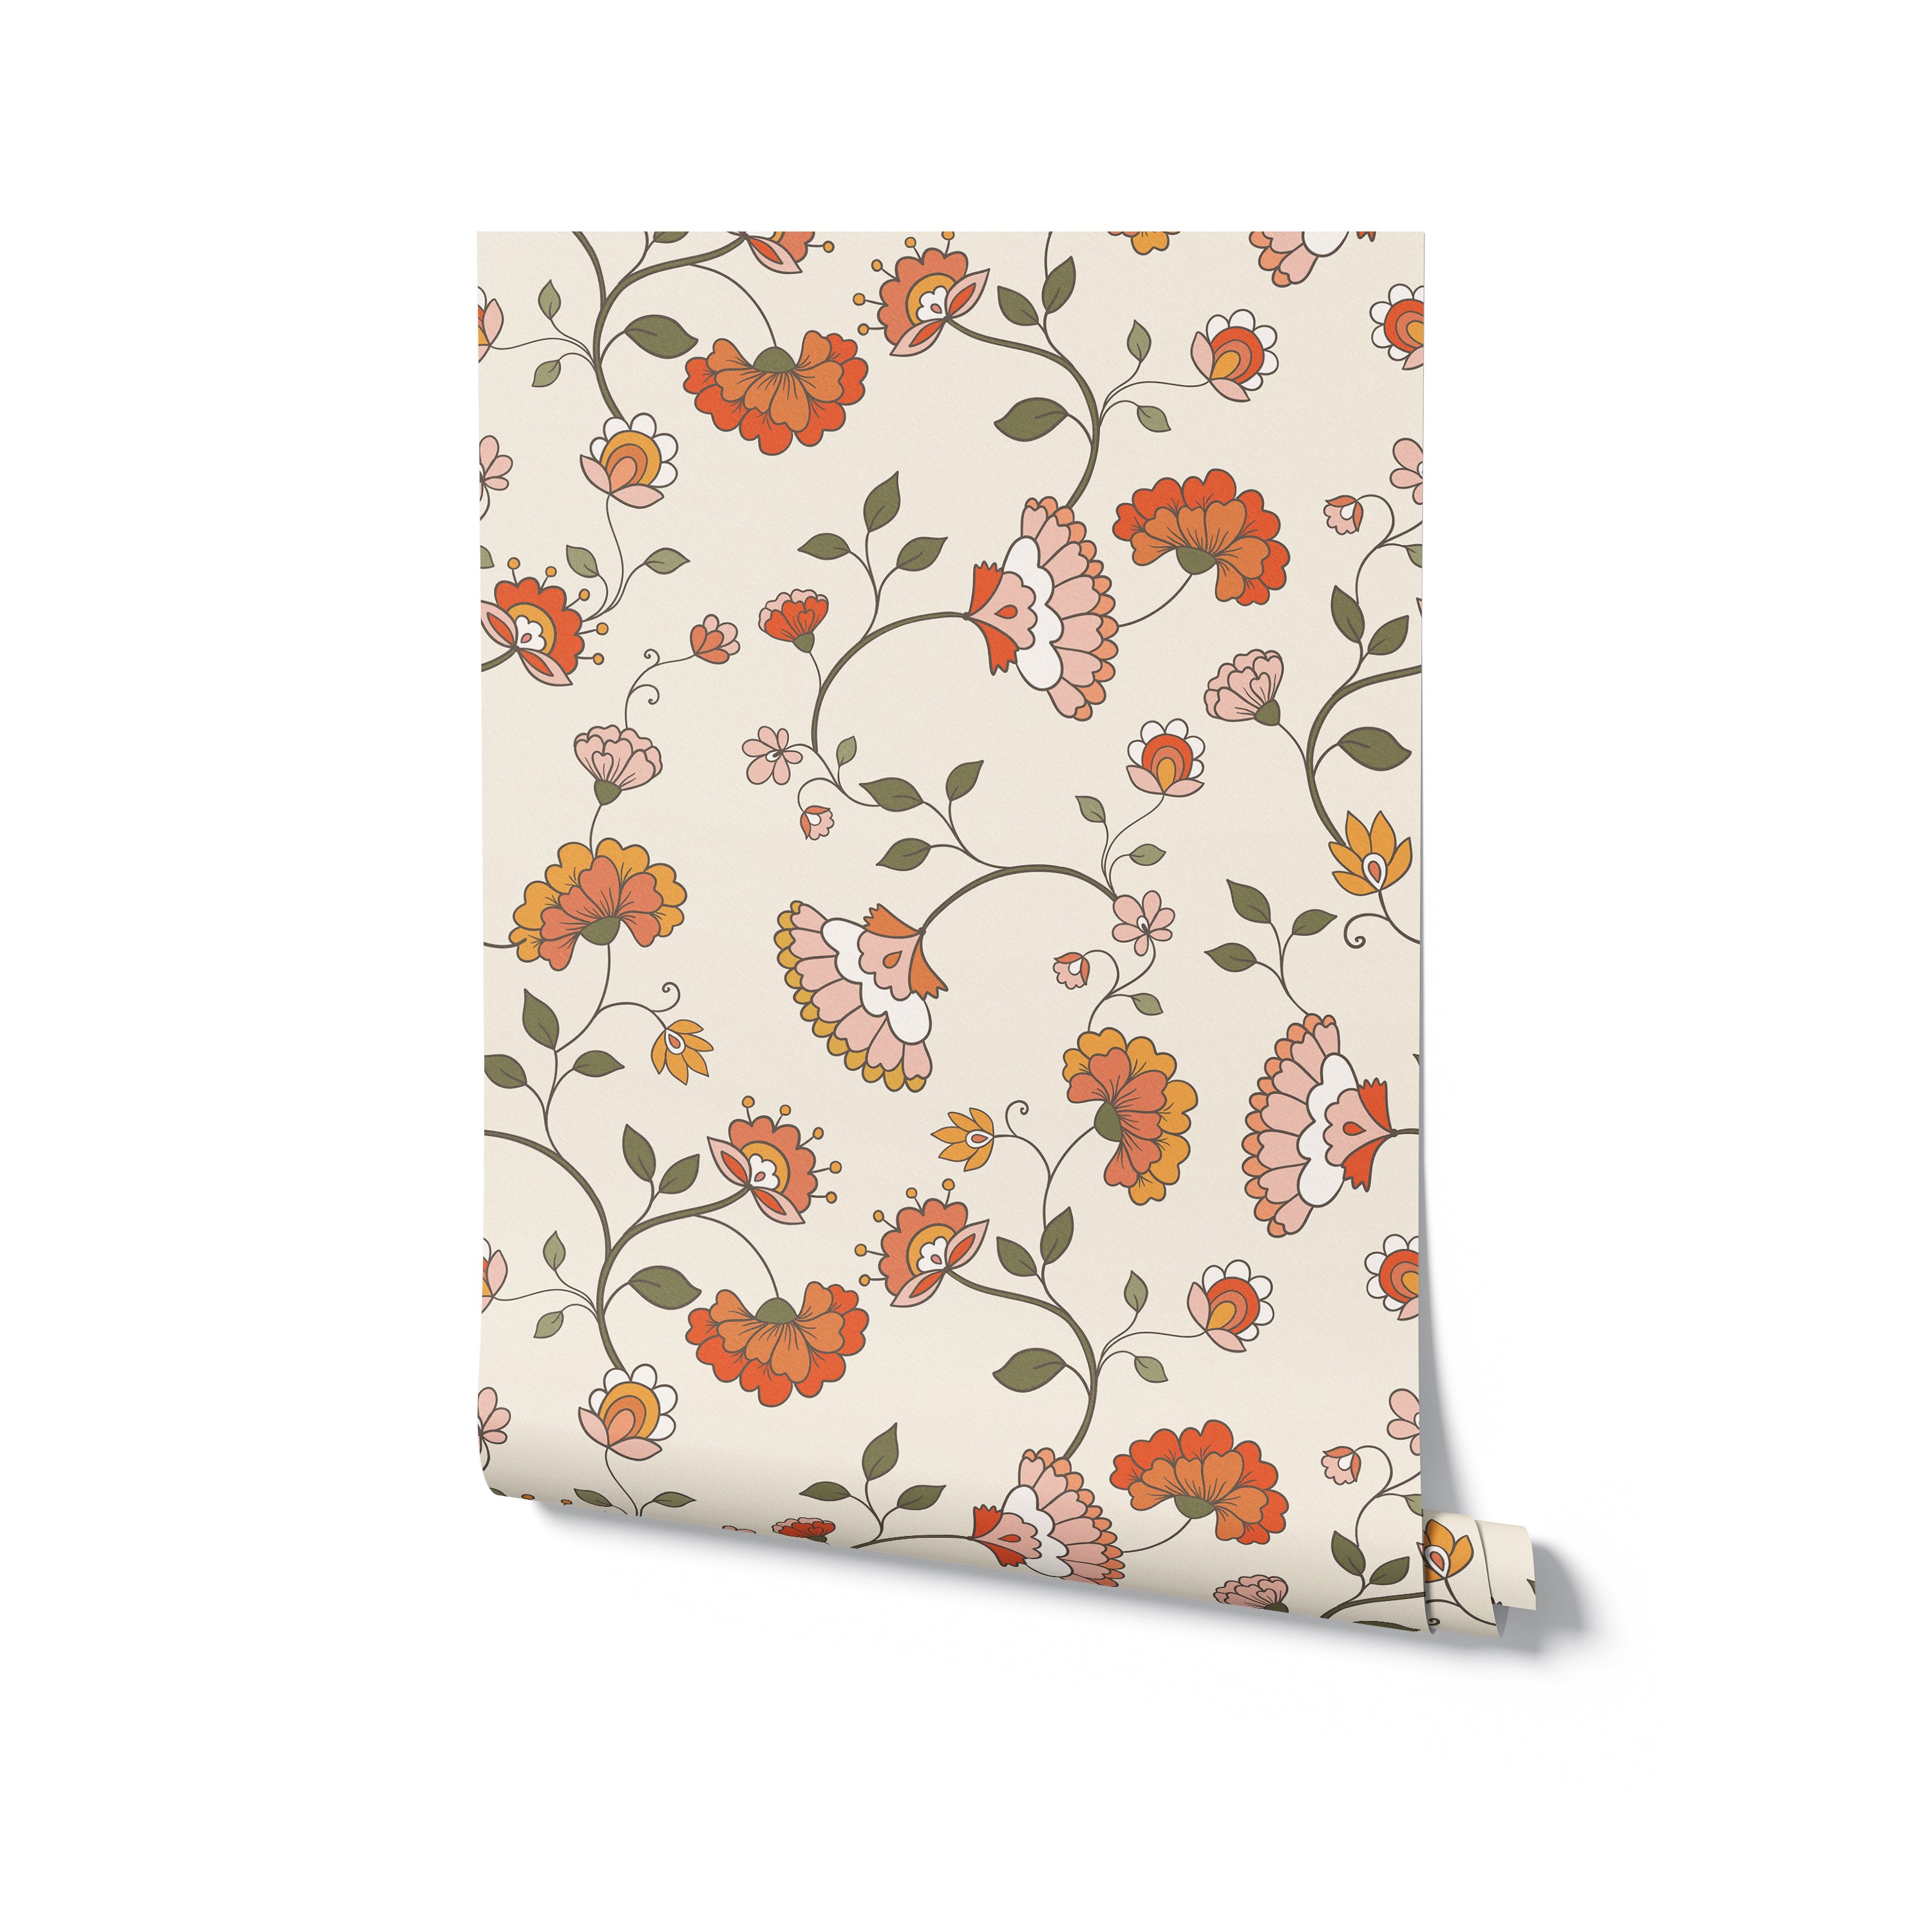 A roll of Retro Pattern Wallpaper leaning against a plain background, displaying the vintage-inspired floral print of orange and pink flowers with green leaves on a neutral backdrop, ready for installation.